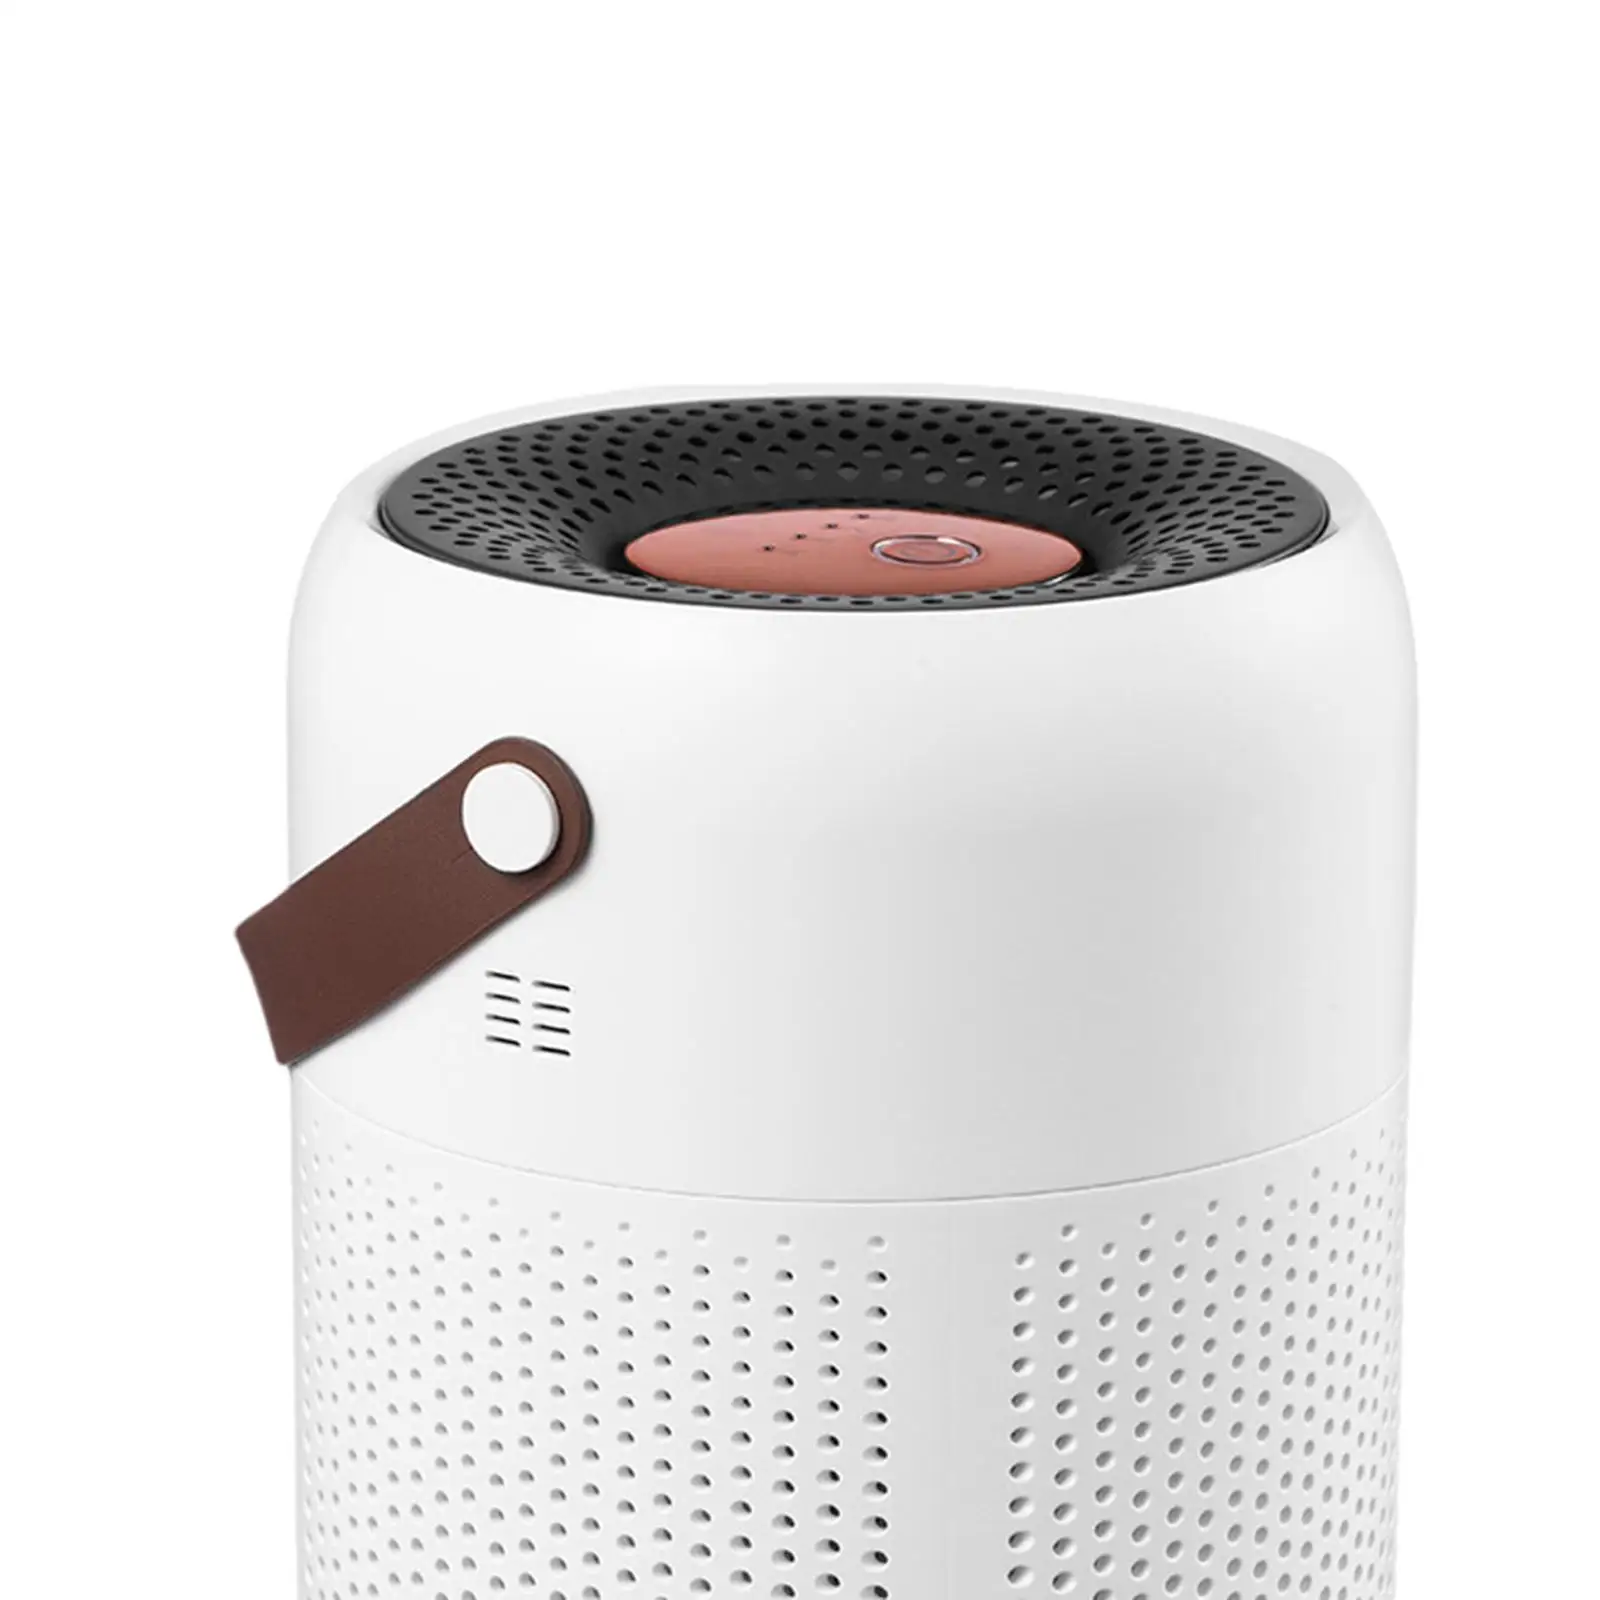 Personal Air Purifier Low Noise Air Cleaner for Home Desktop Household